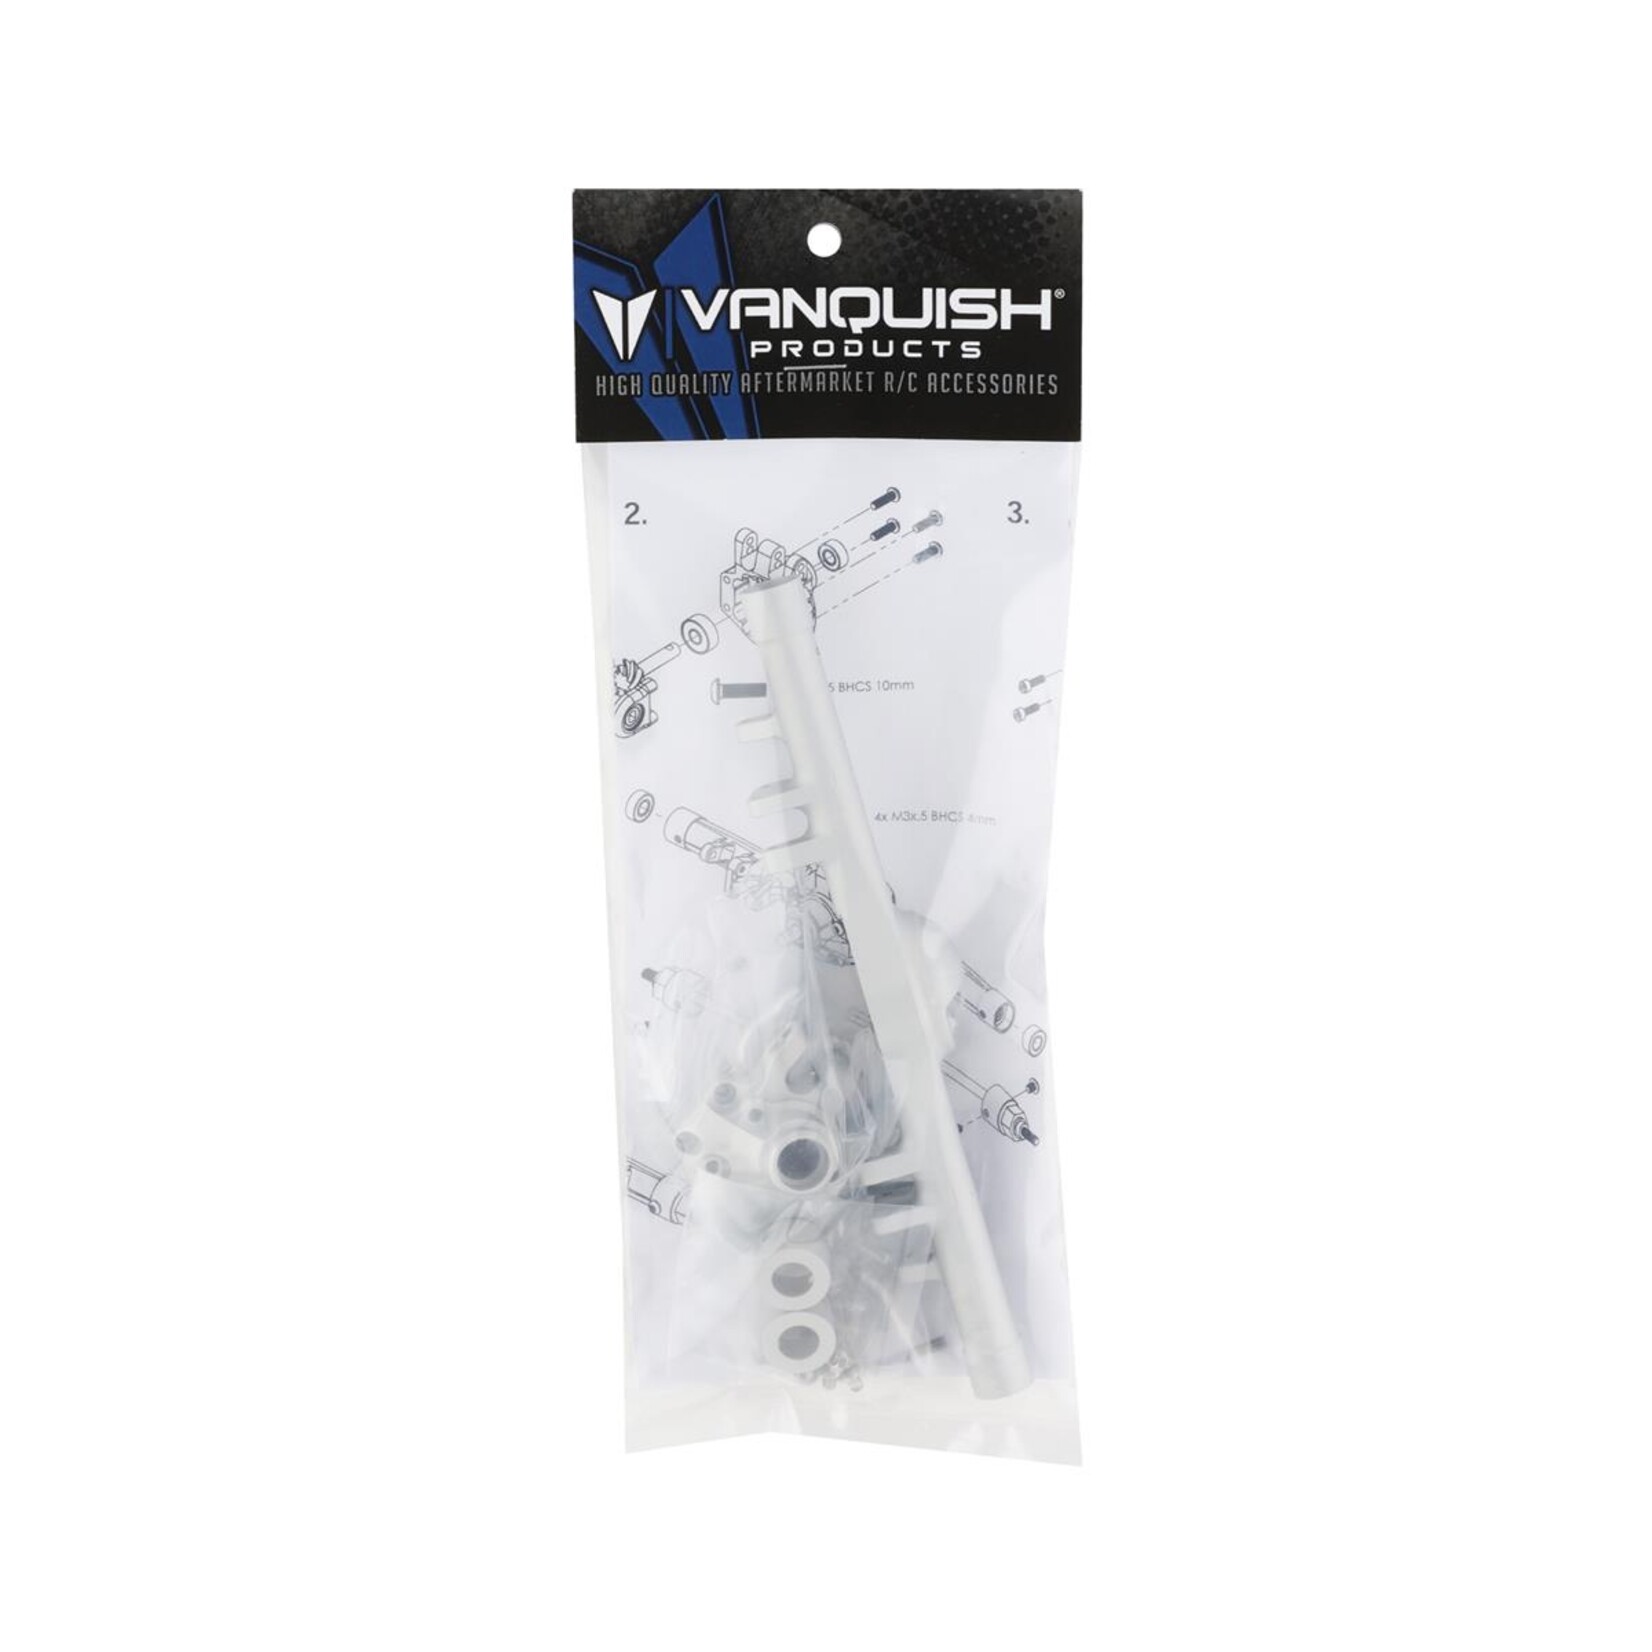 Vanquish Products Vanquish Products F10T Aluminum Rear Axle Housing (Clear) #VPS08633